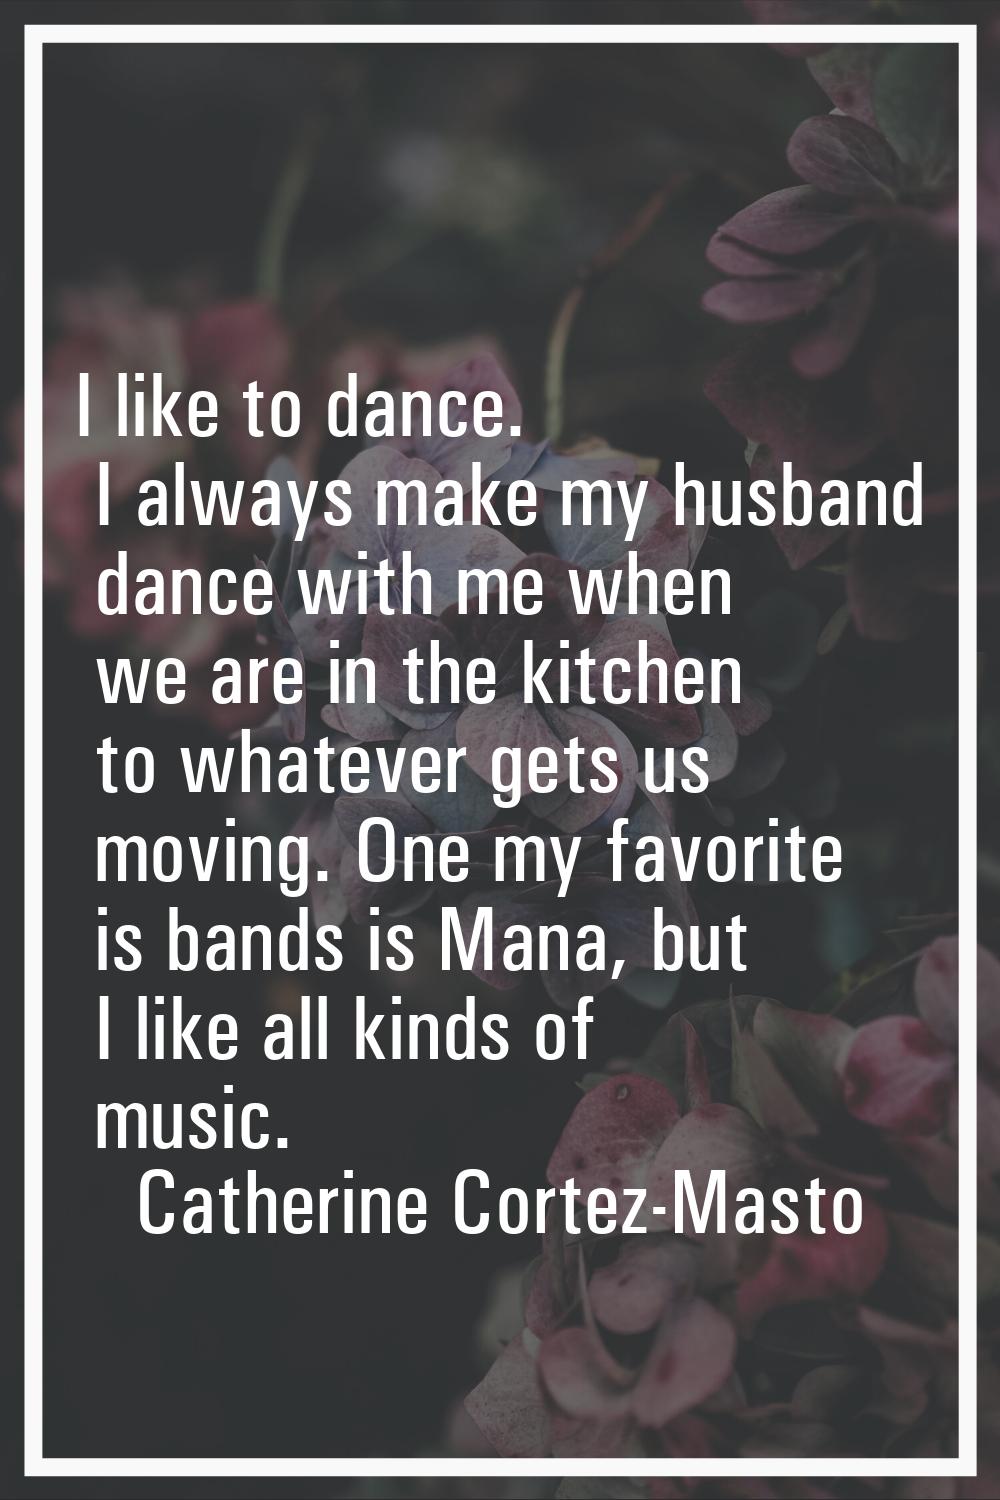 I like to dance. I always make my husband dance with me when we are in the kitchen to whatever gets